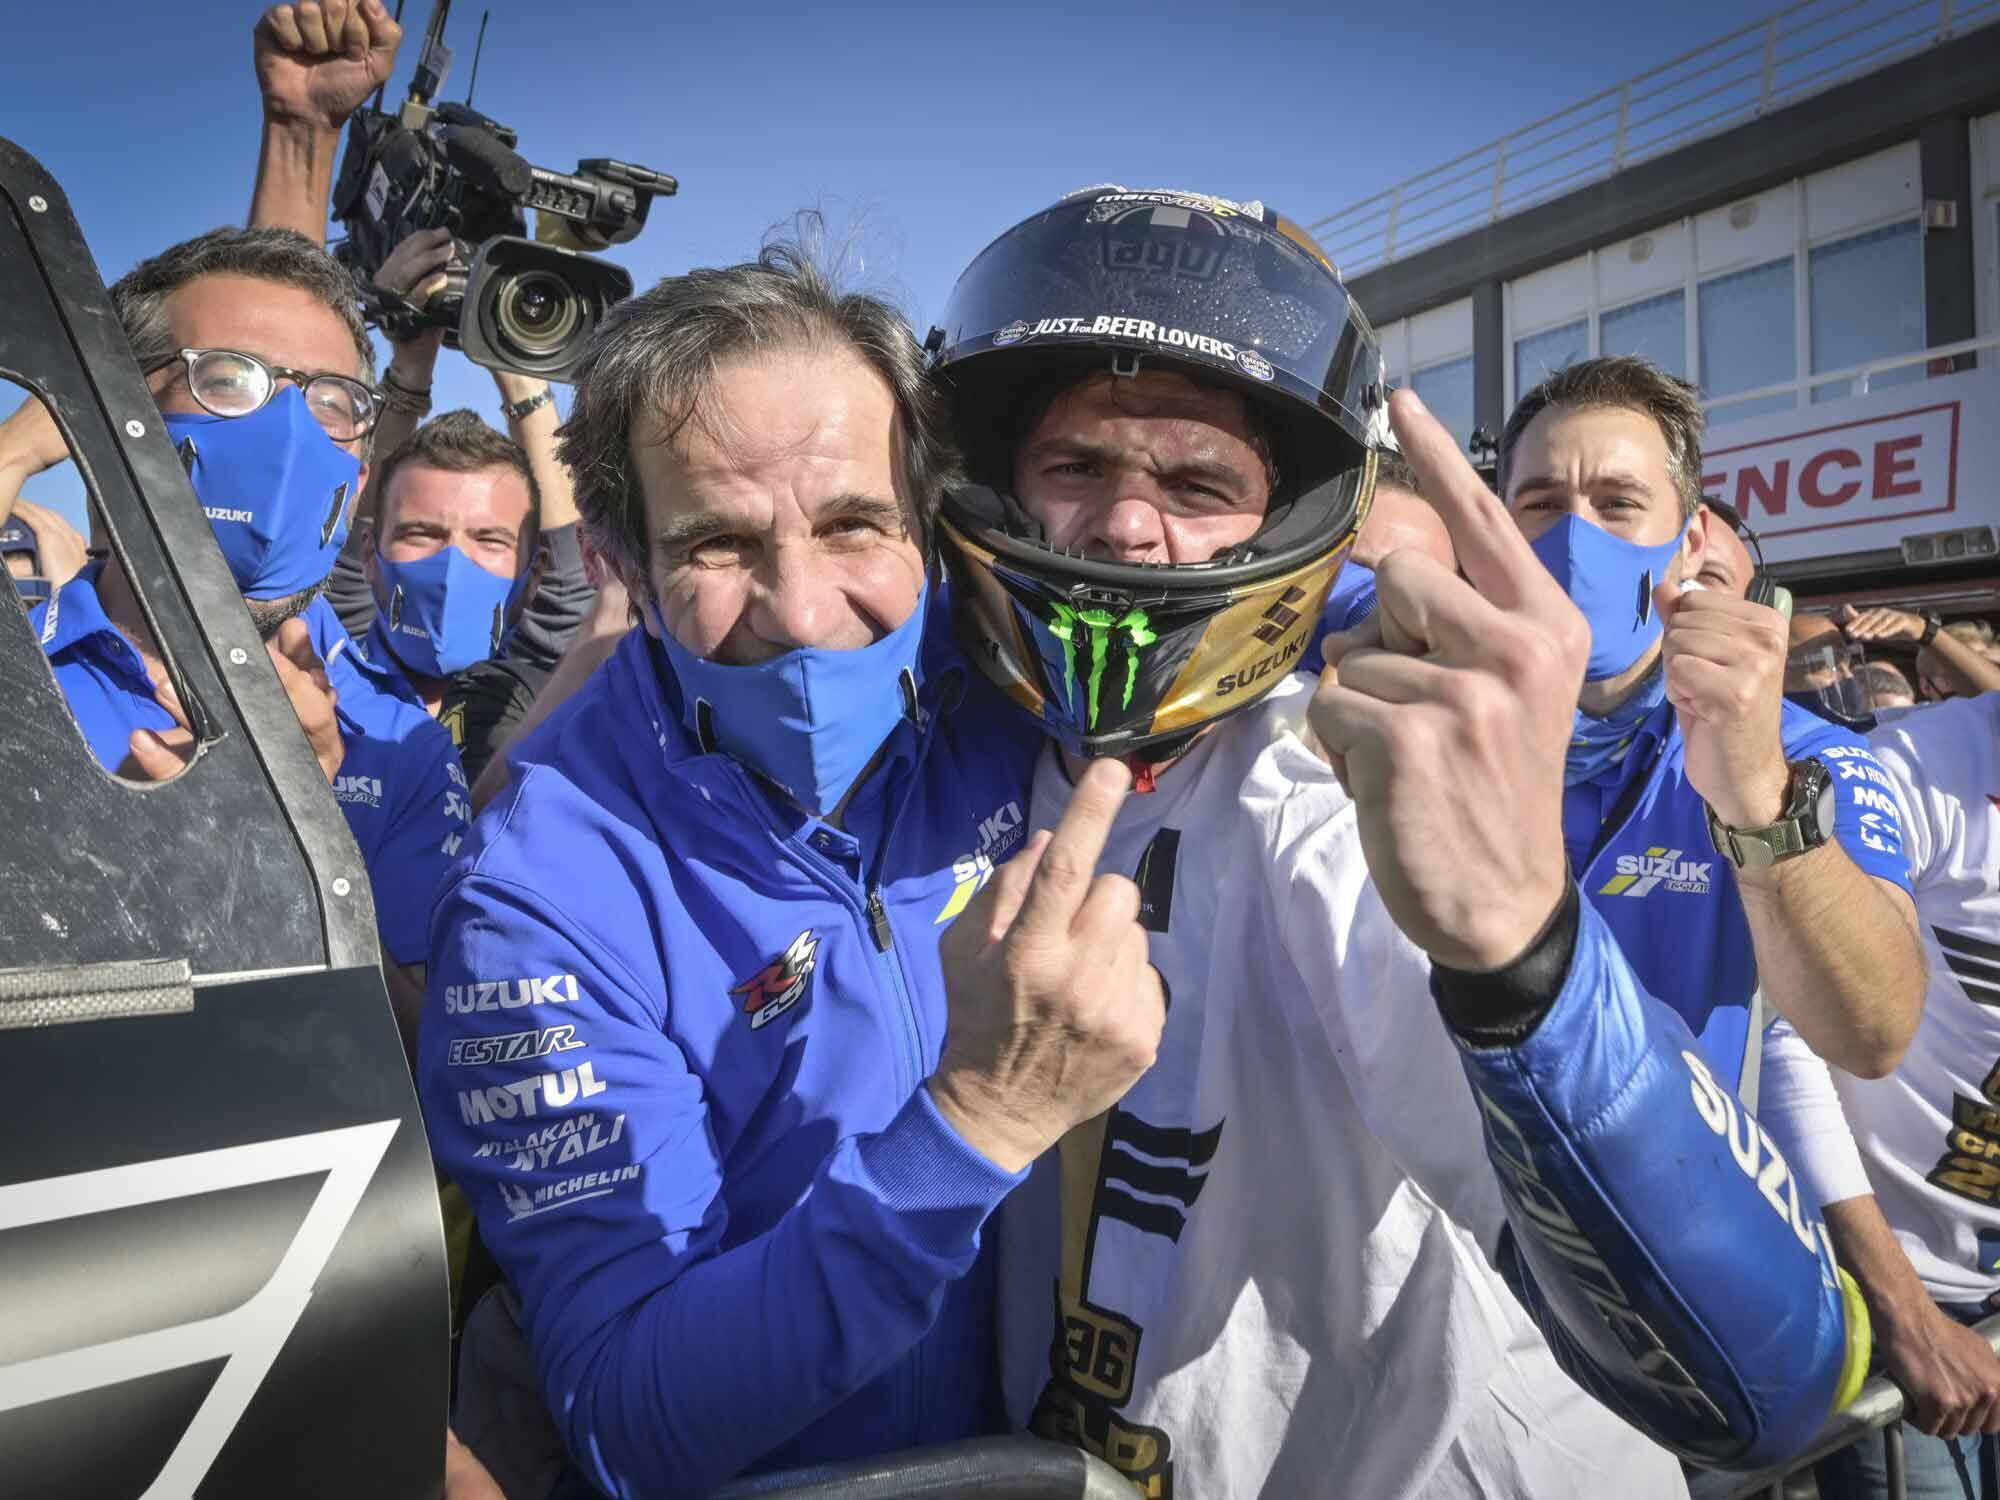 Brivio’s building of an extremely motivated team led to Mir’s 2020 MotoGP Championship.